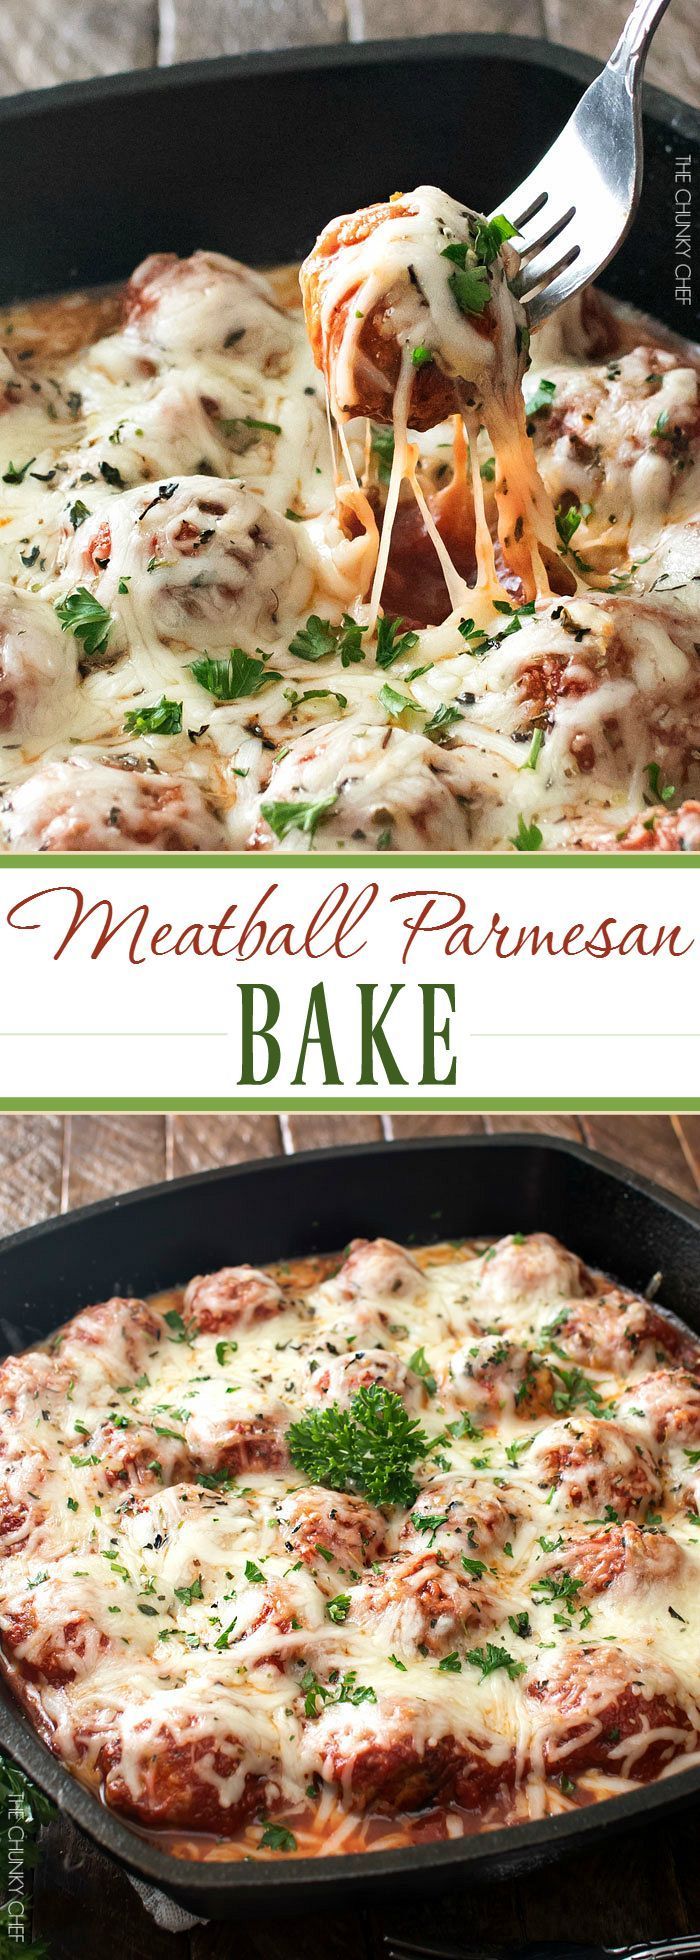 Meatball Parmesan Bake | Melt in your mouth homemade meatballs coated in marinara sauce, topped with Italian cheeses and baked to